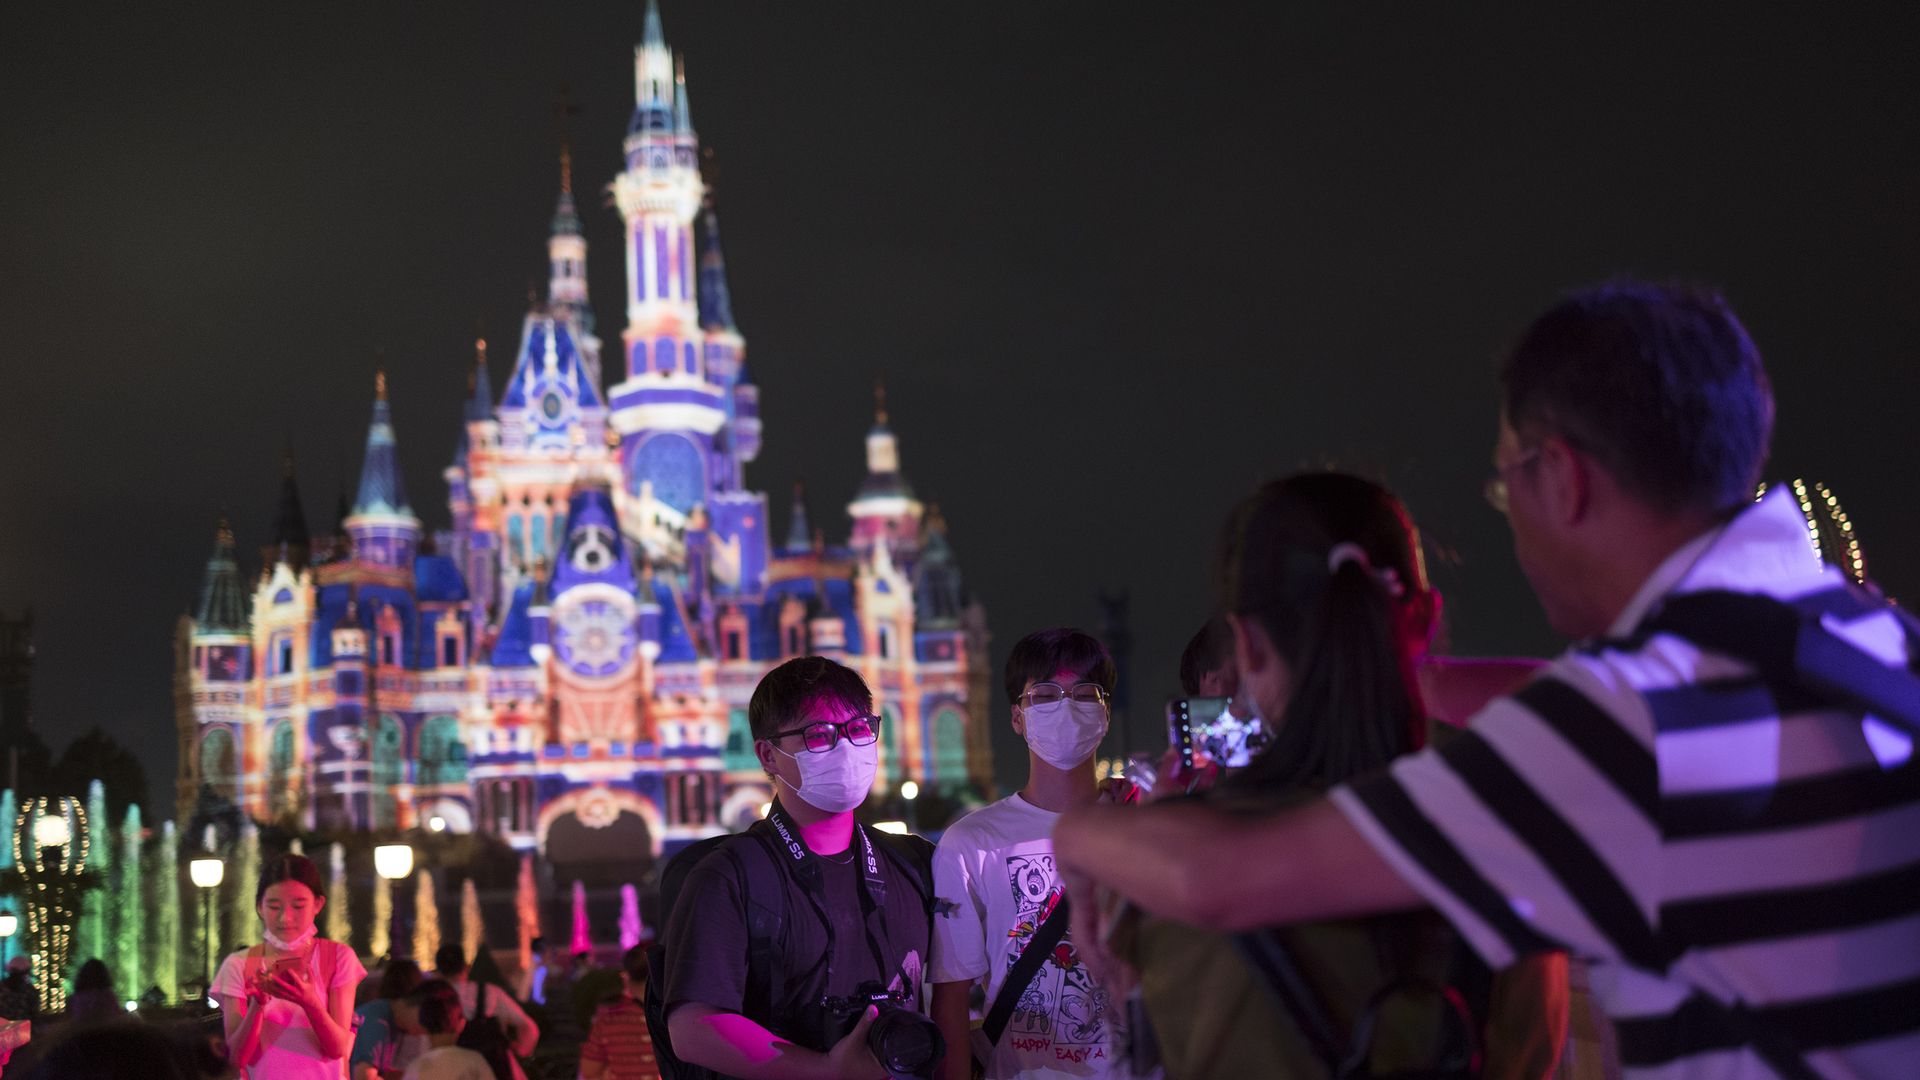 People pose for photo infront of the Enchanted Storybook Castle at Shanghai Disneyland.